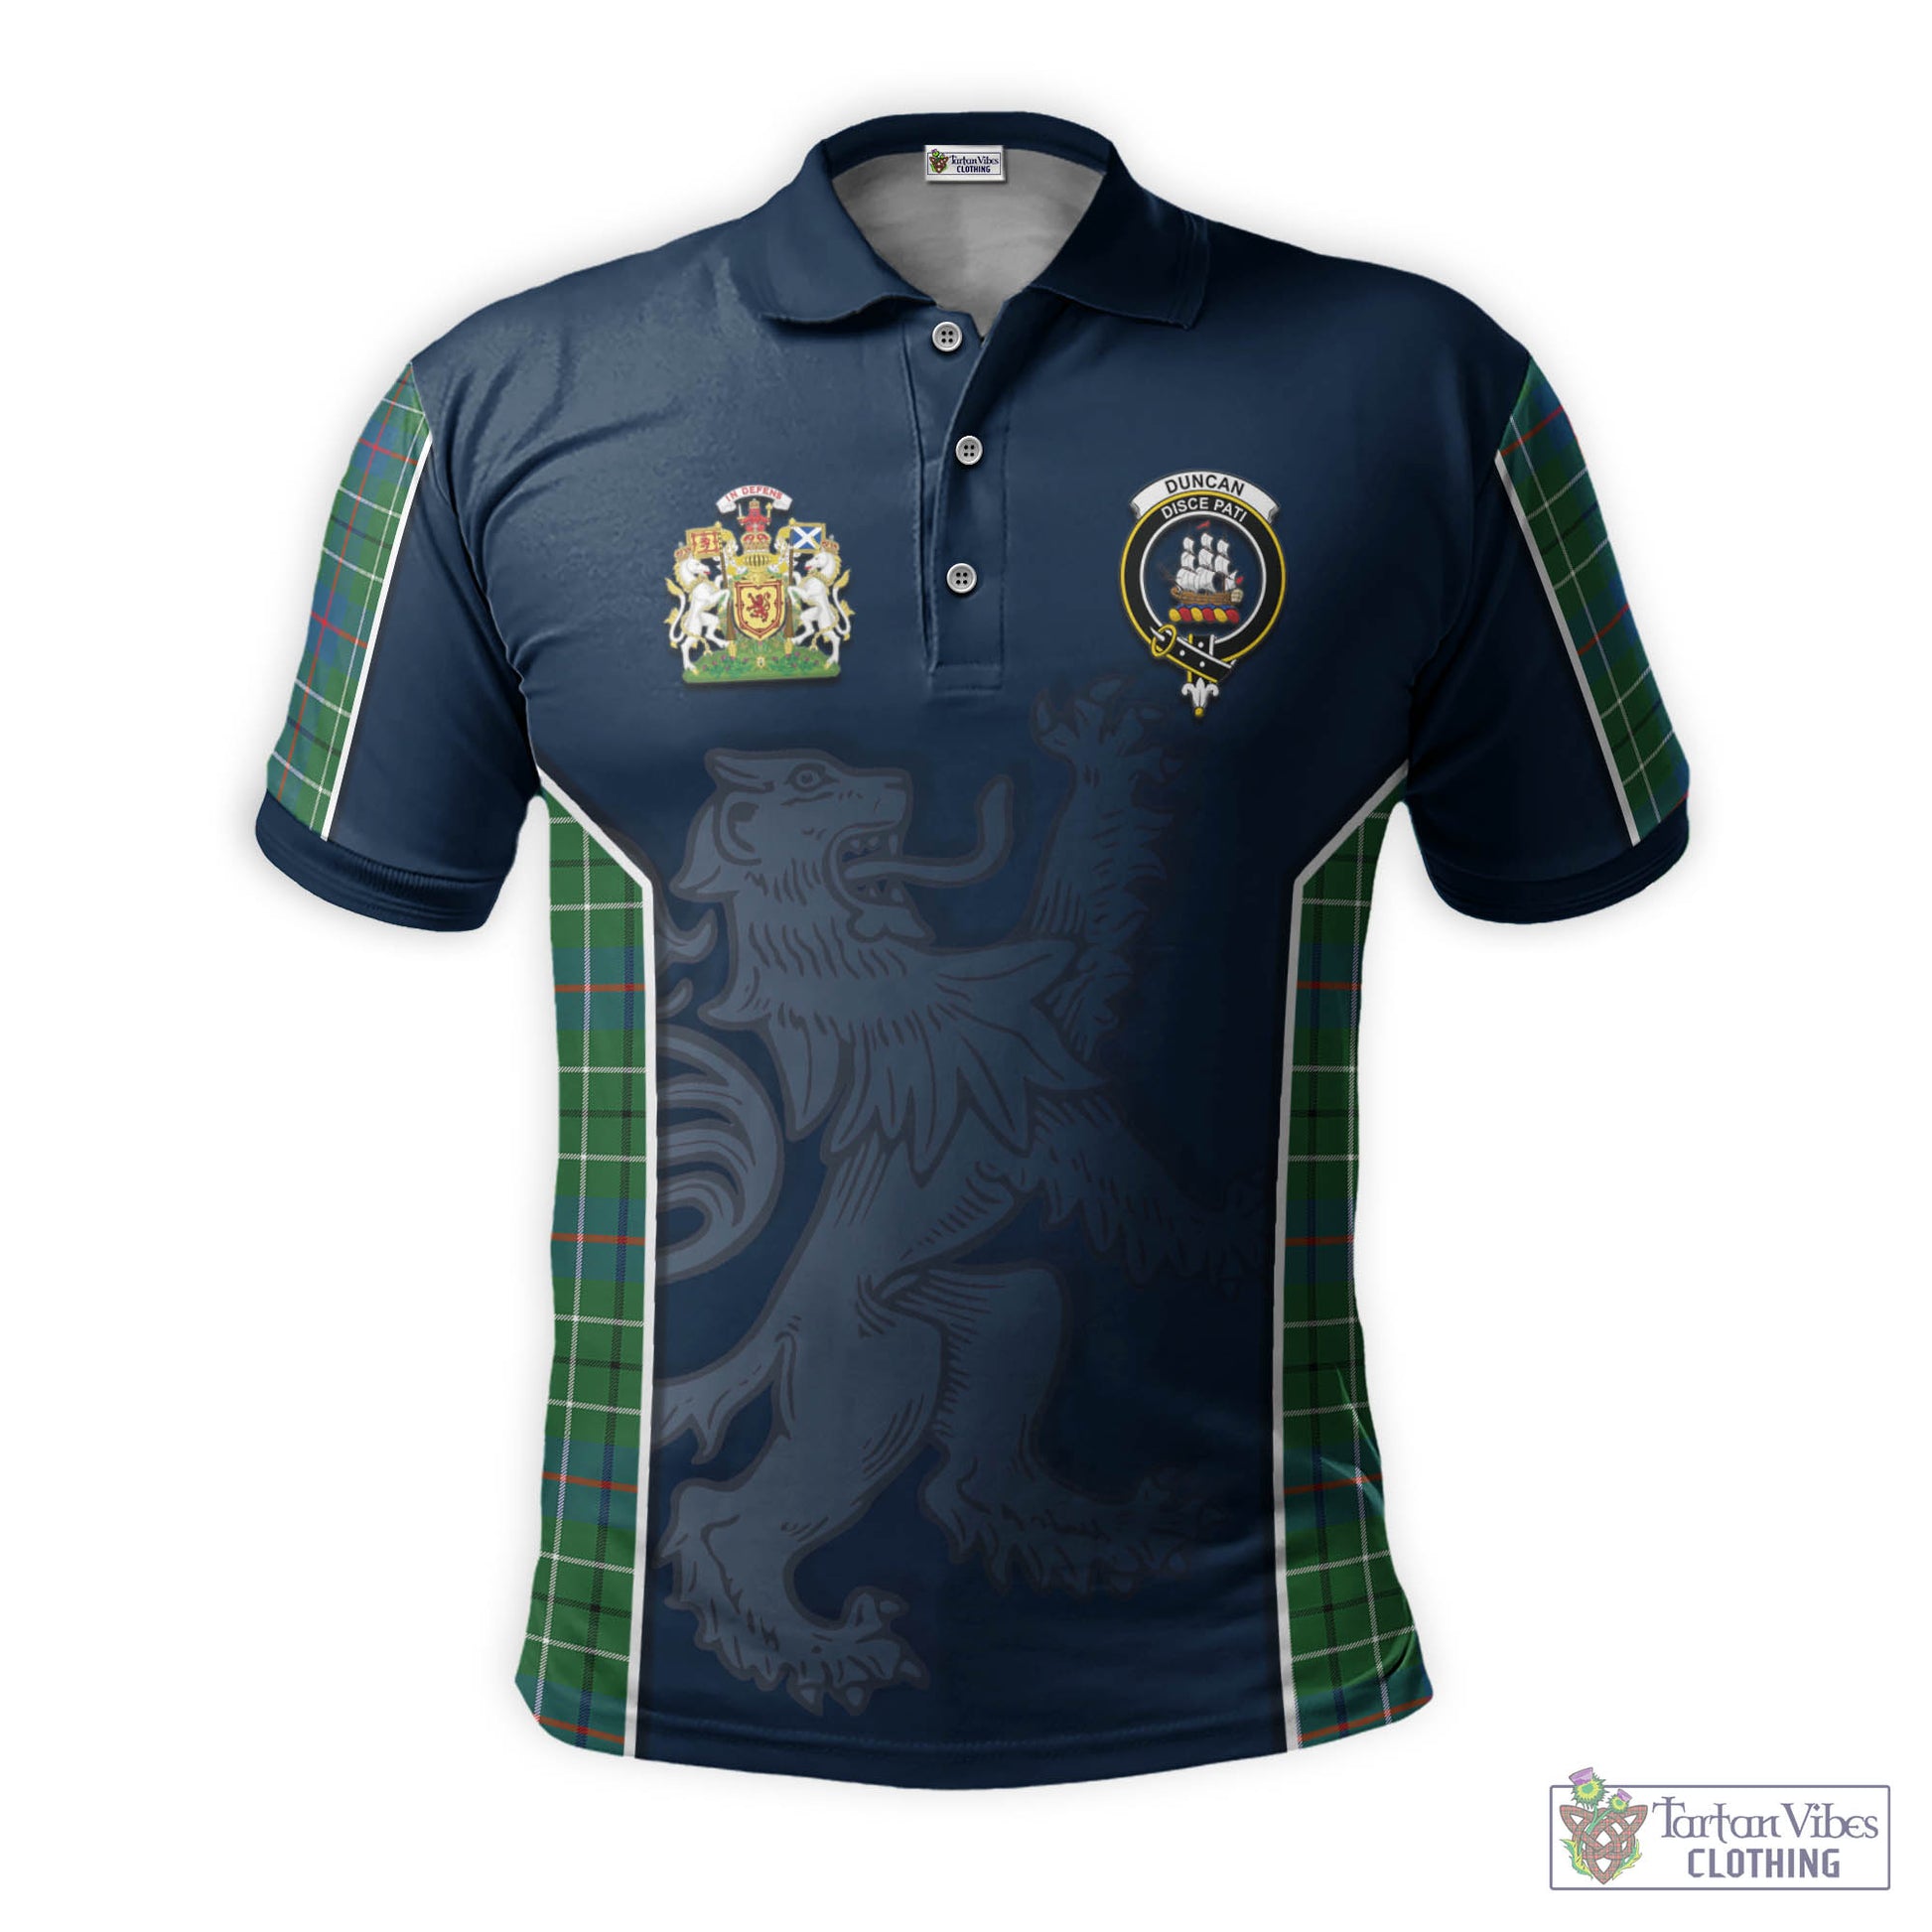 Tartan Vibes Clothing Duncan Ancient Tartan Men's Polo Shirt with Family Crest and Lion Rampant Vibes Sport Style